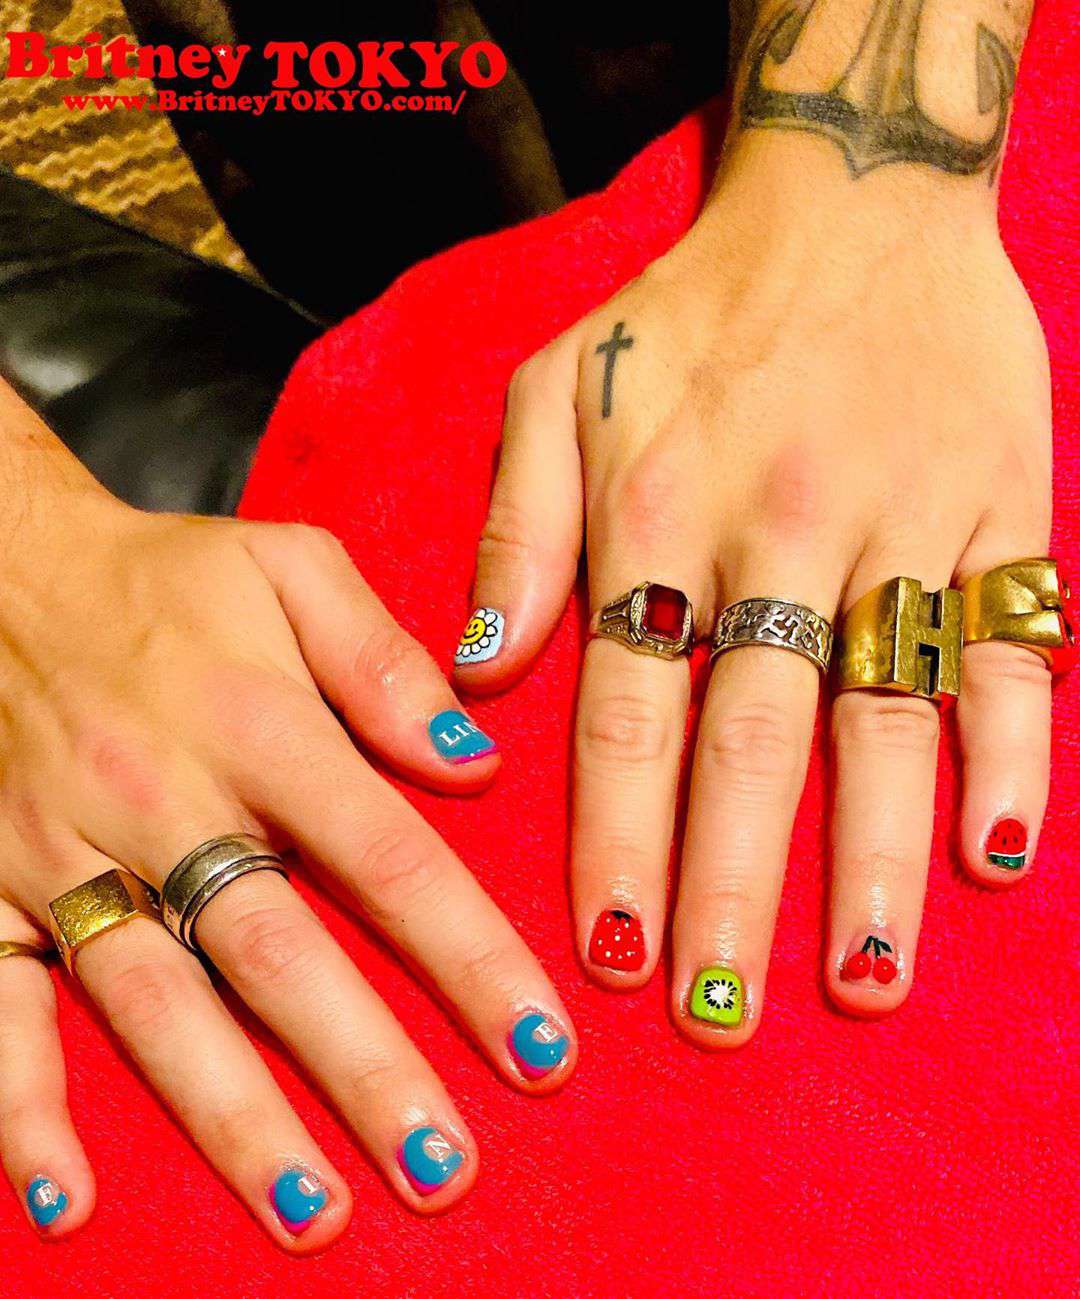 See Harry Styles' Latest Manicure Inspired by His Second Album 'Fine Line' | PEOPLE.com